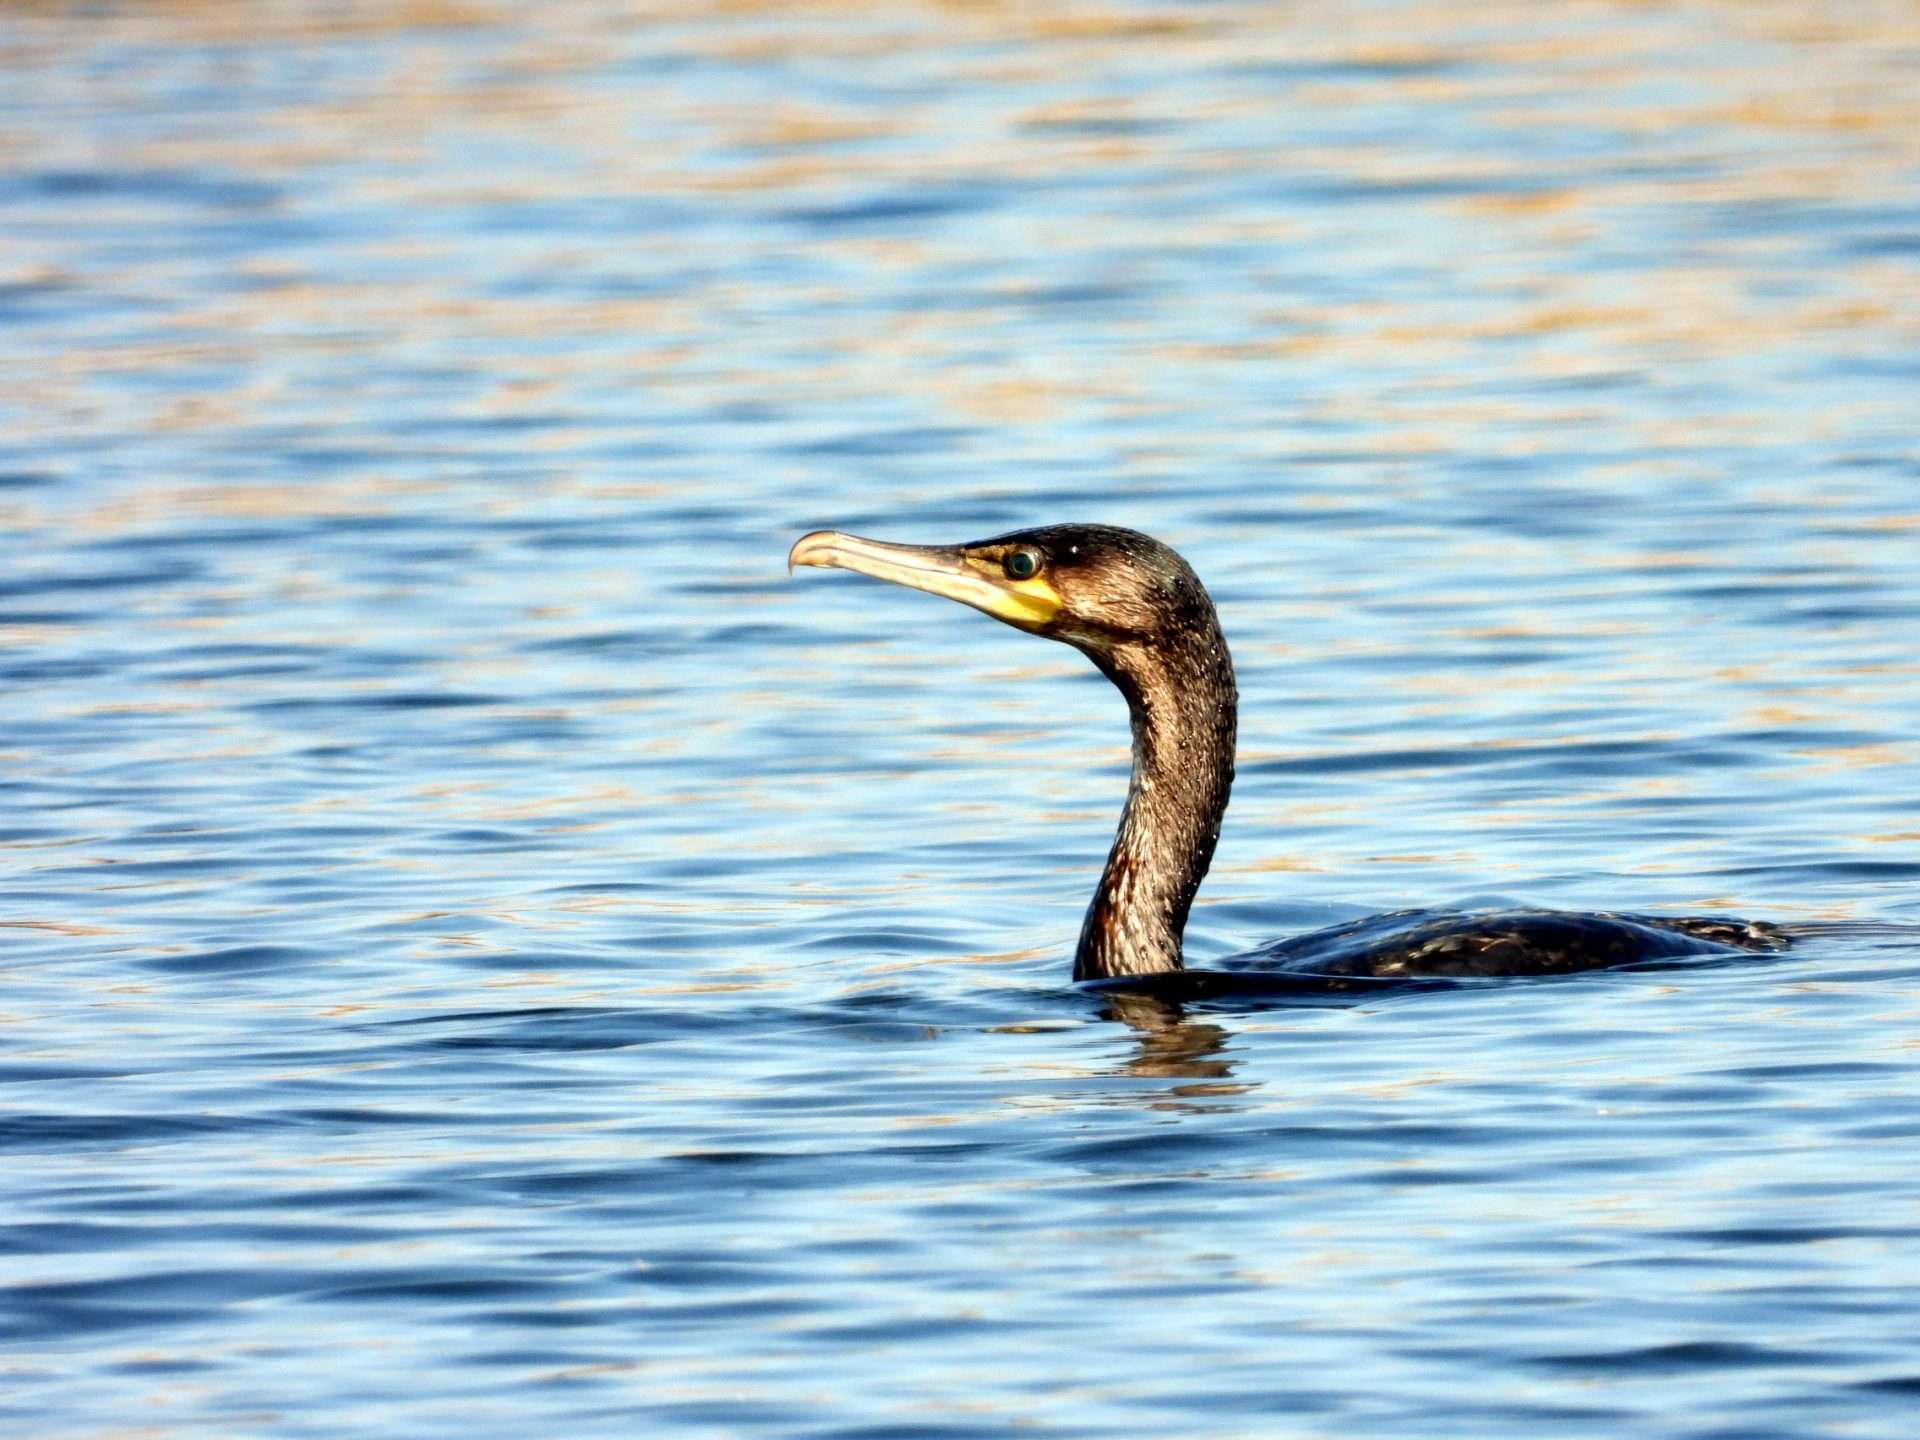 Cormorant by Kenneth Bradley at Exminster marshes RSPB